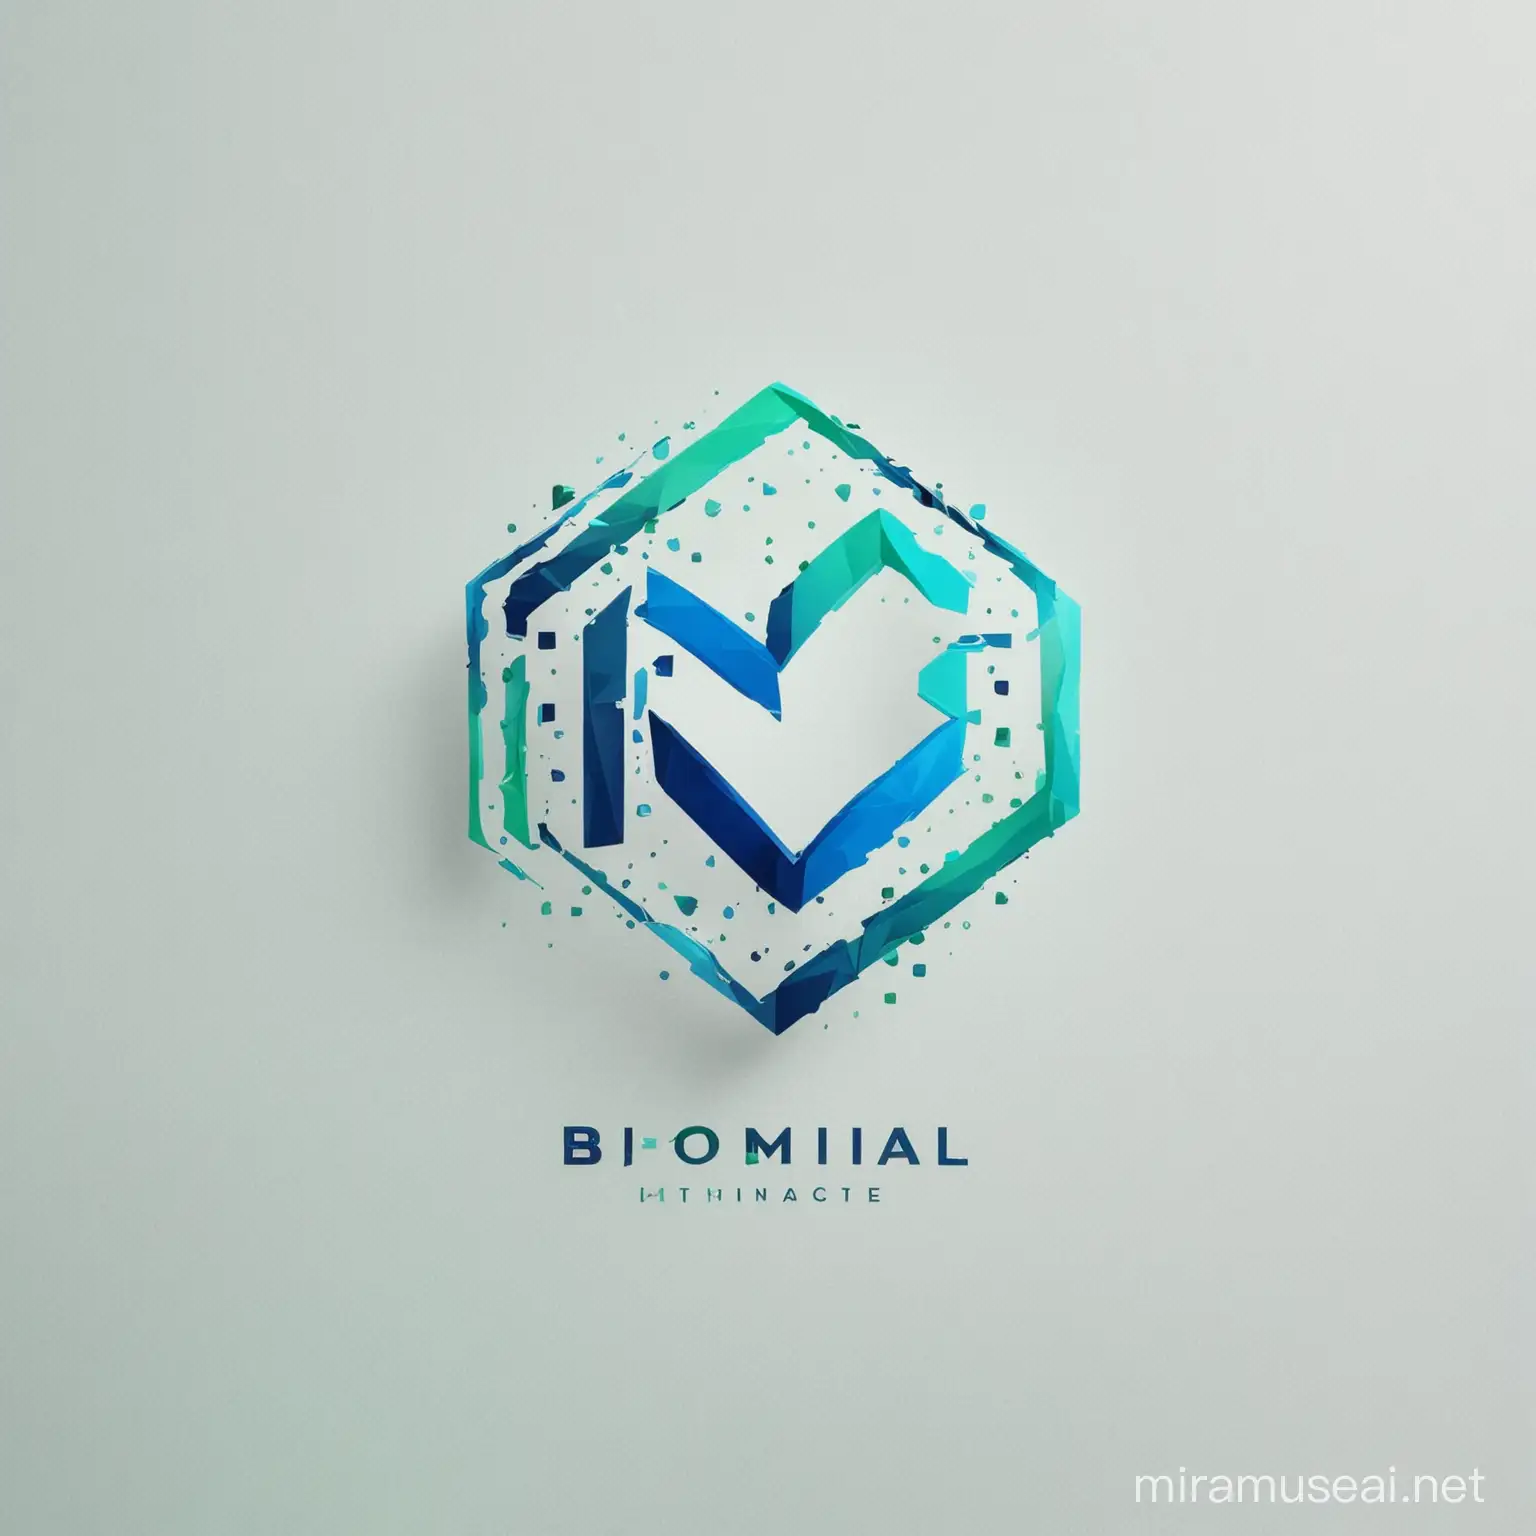 Binomial Financial Technologies Logo Symbolizing Strength and Intelligence in Beautiful Blue and Green